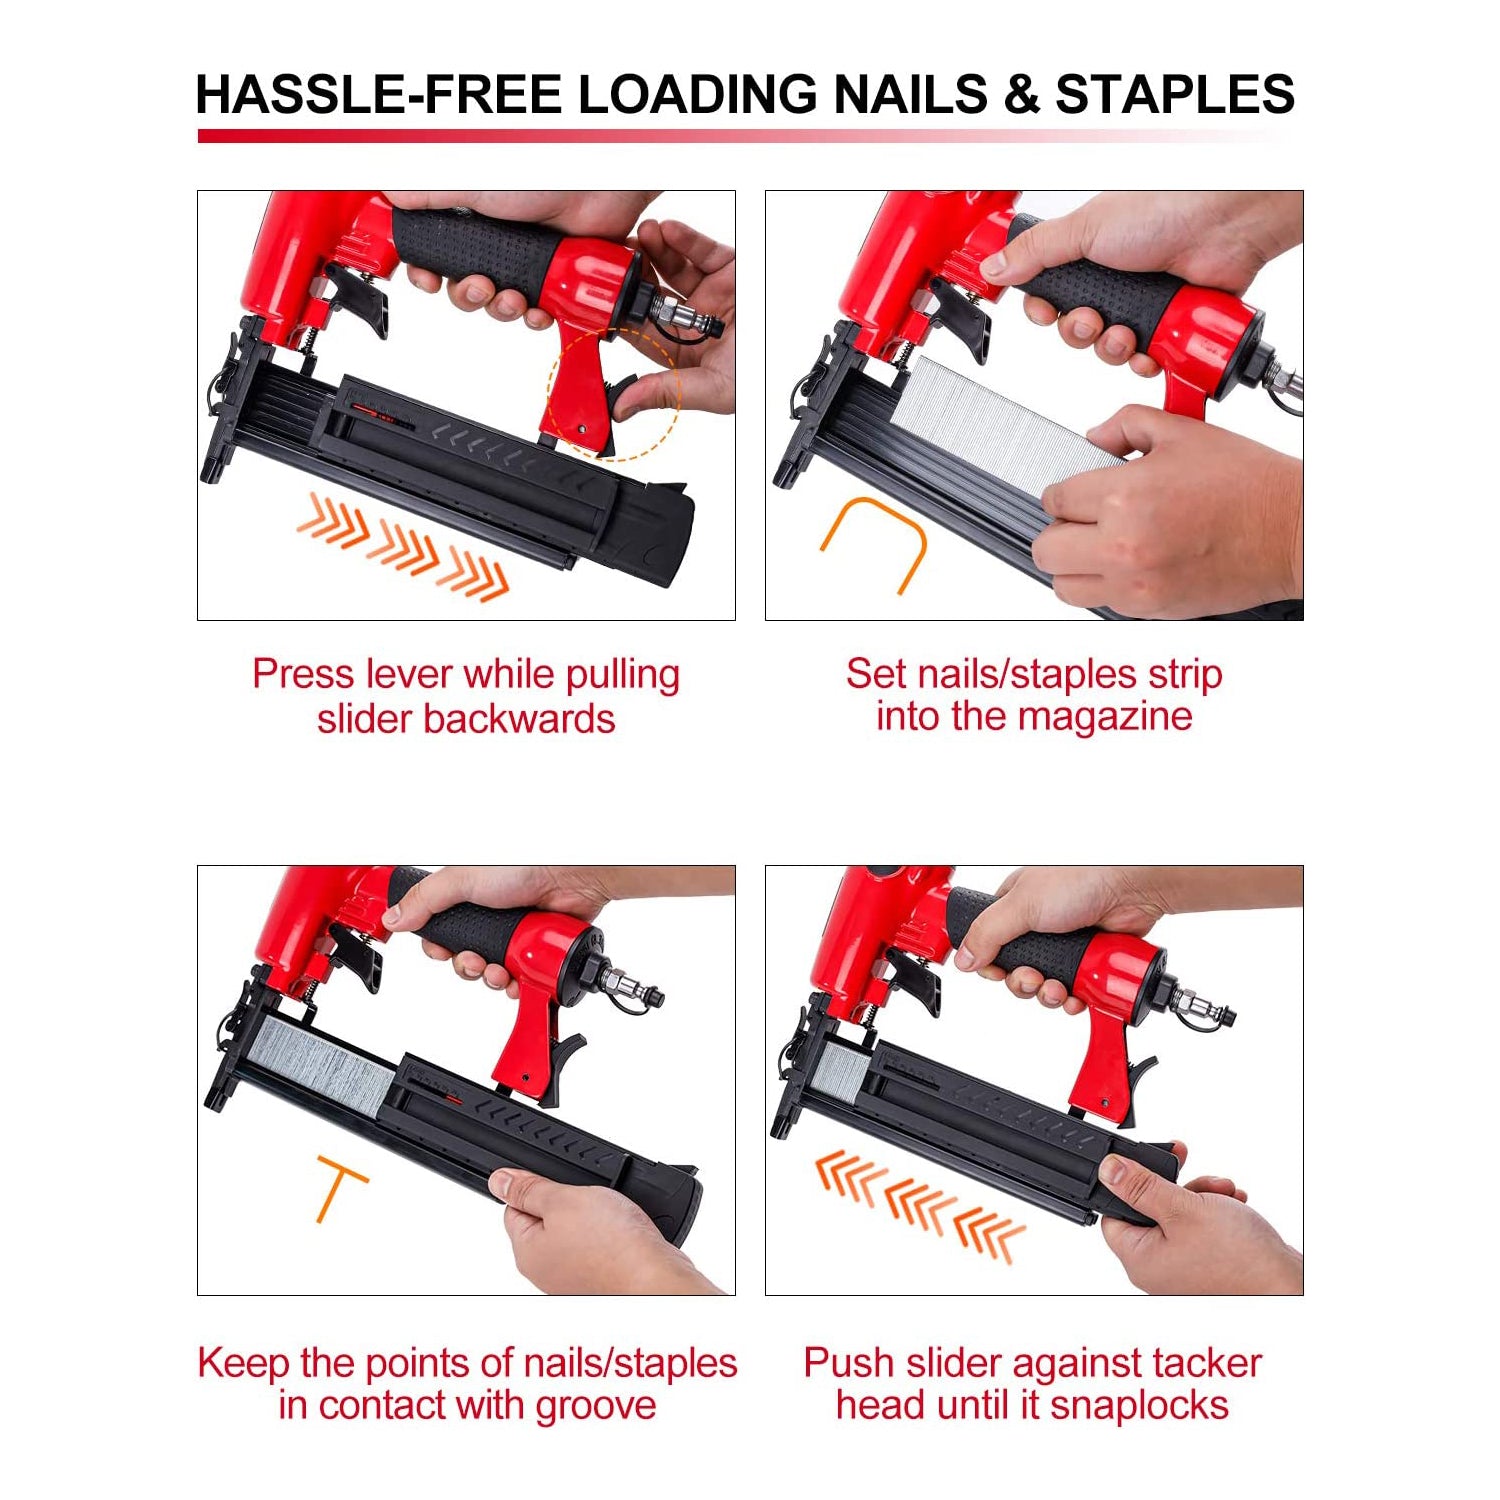 ValueMax 18 Gauge Pneumatic Brad Nailer, 2-in-1 Nail Gun Staple Gun with 1-5/8 inch Staples, 2-5/8 inch Brad Nails, Carrying Case and Safety Glasses